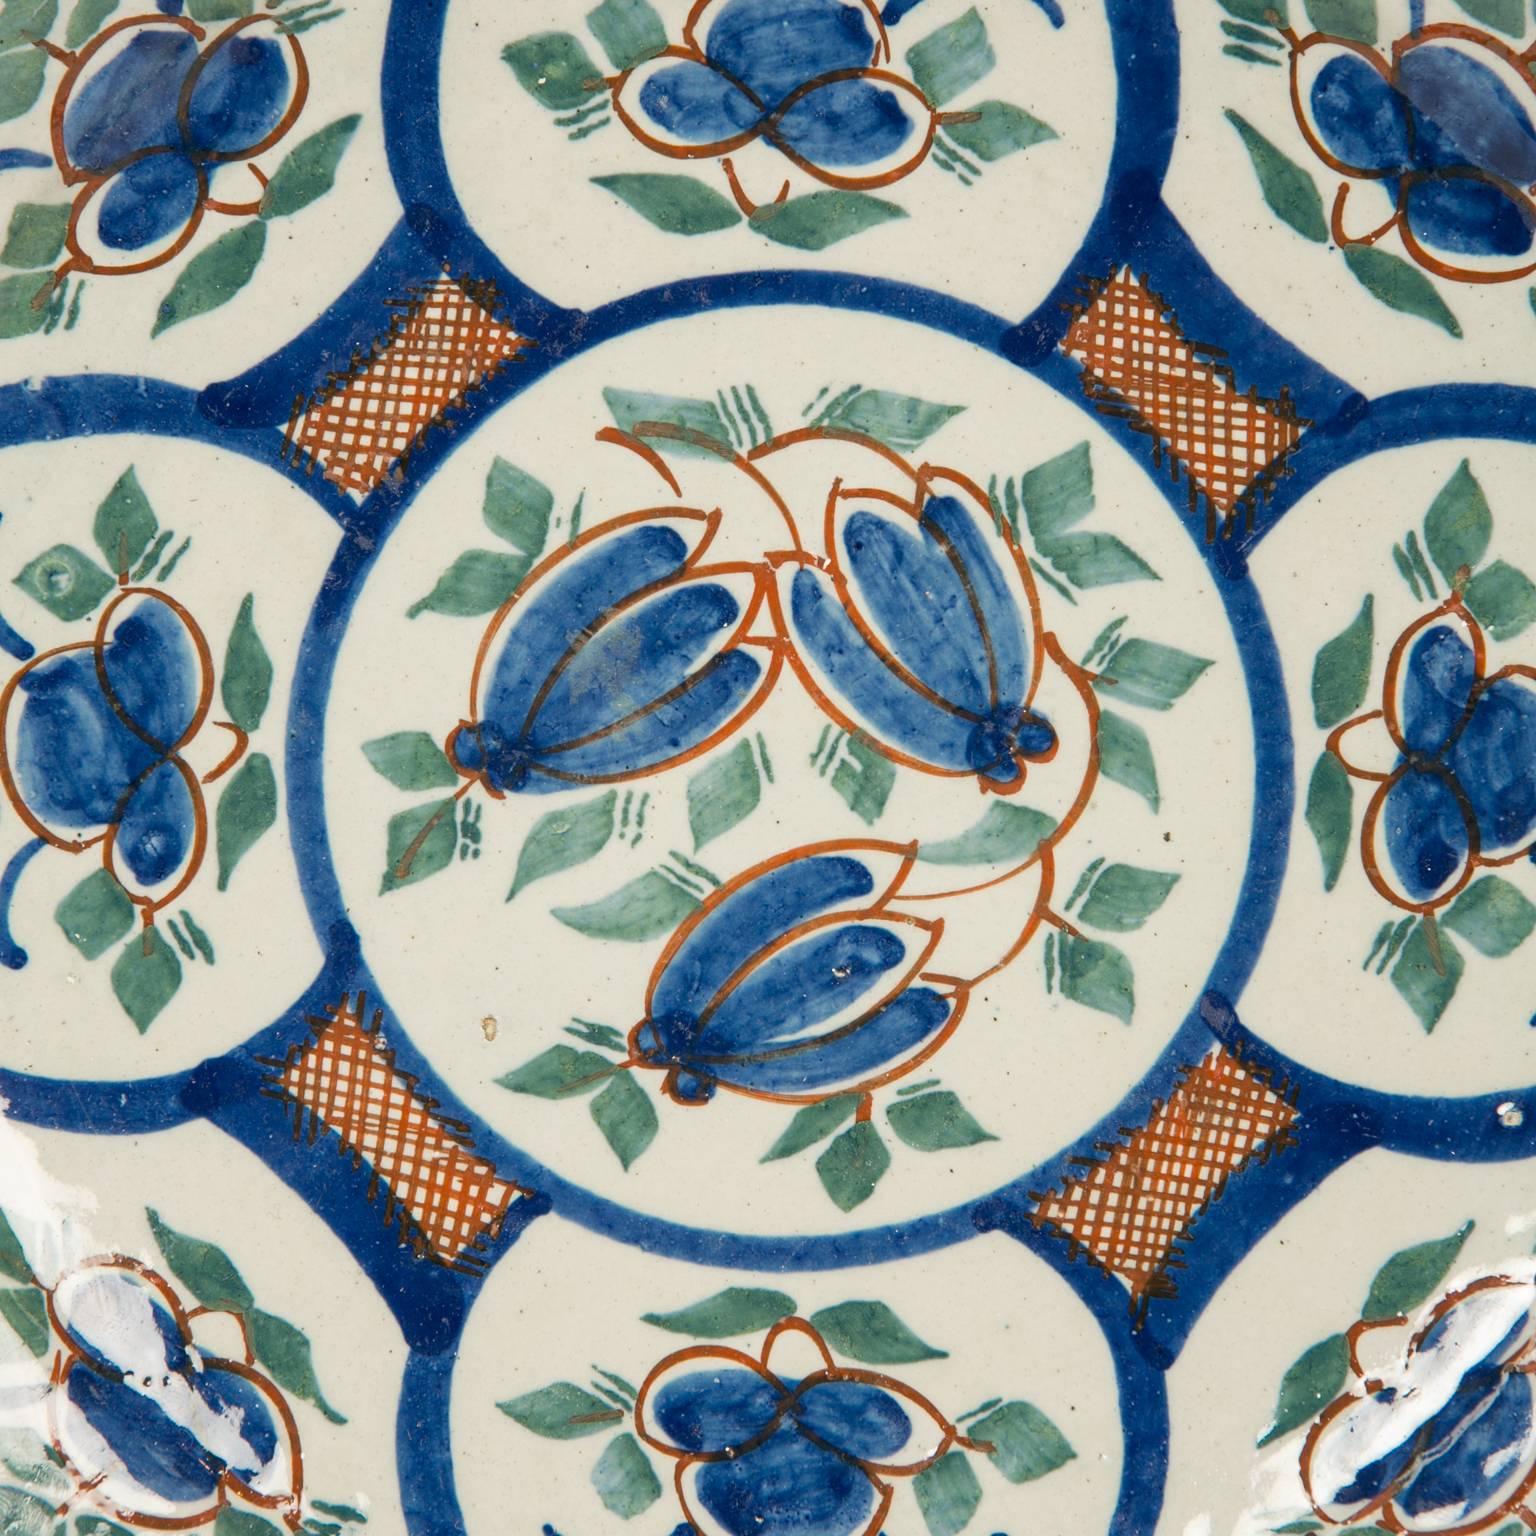 A pair of Dutch delft pancake plates decorated all-over with a colorful design of panels showing blue tulips and green leaves. The strong design is accented by areas of red cross hatching which complements the blue and green tulip decoration. 
These